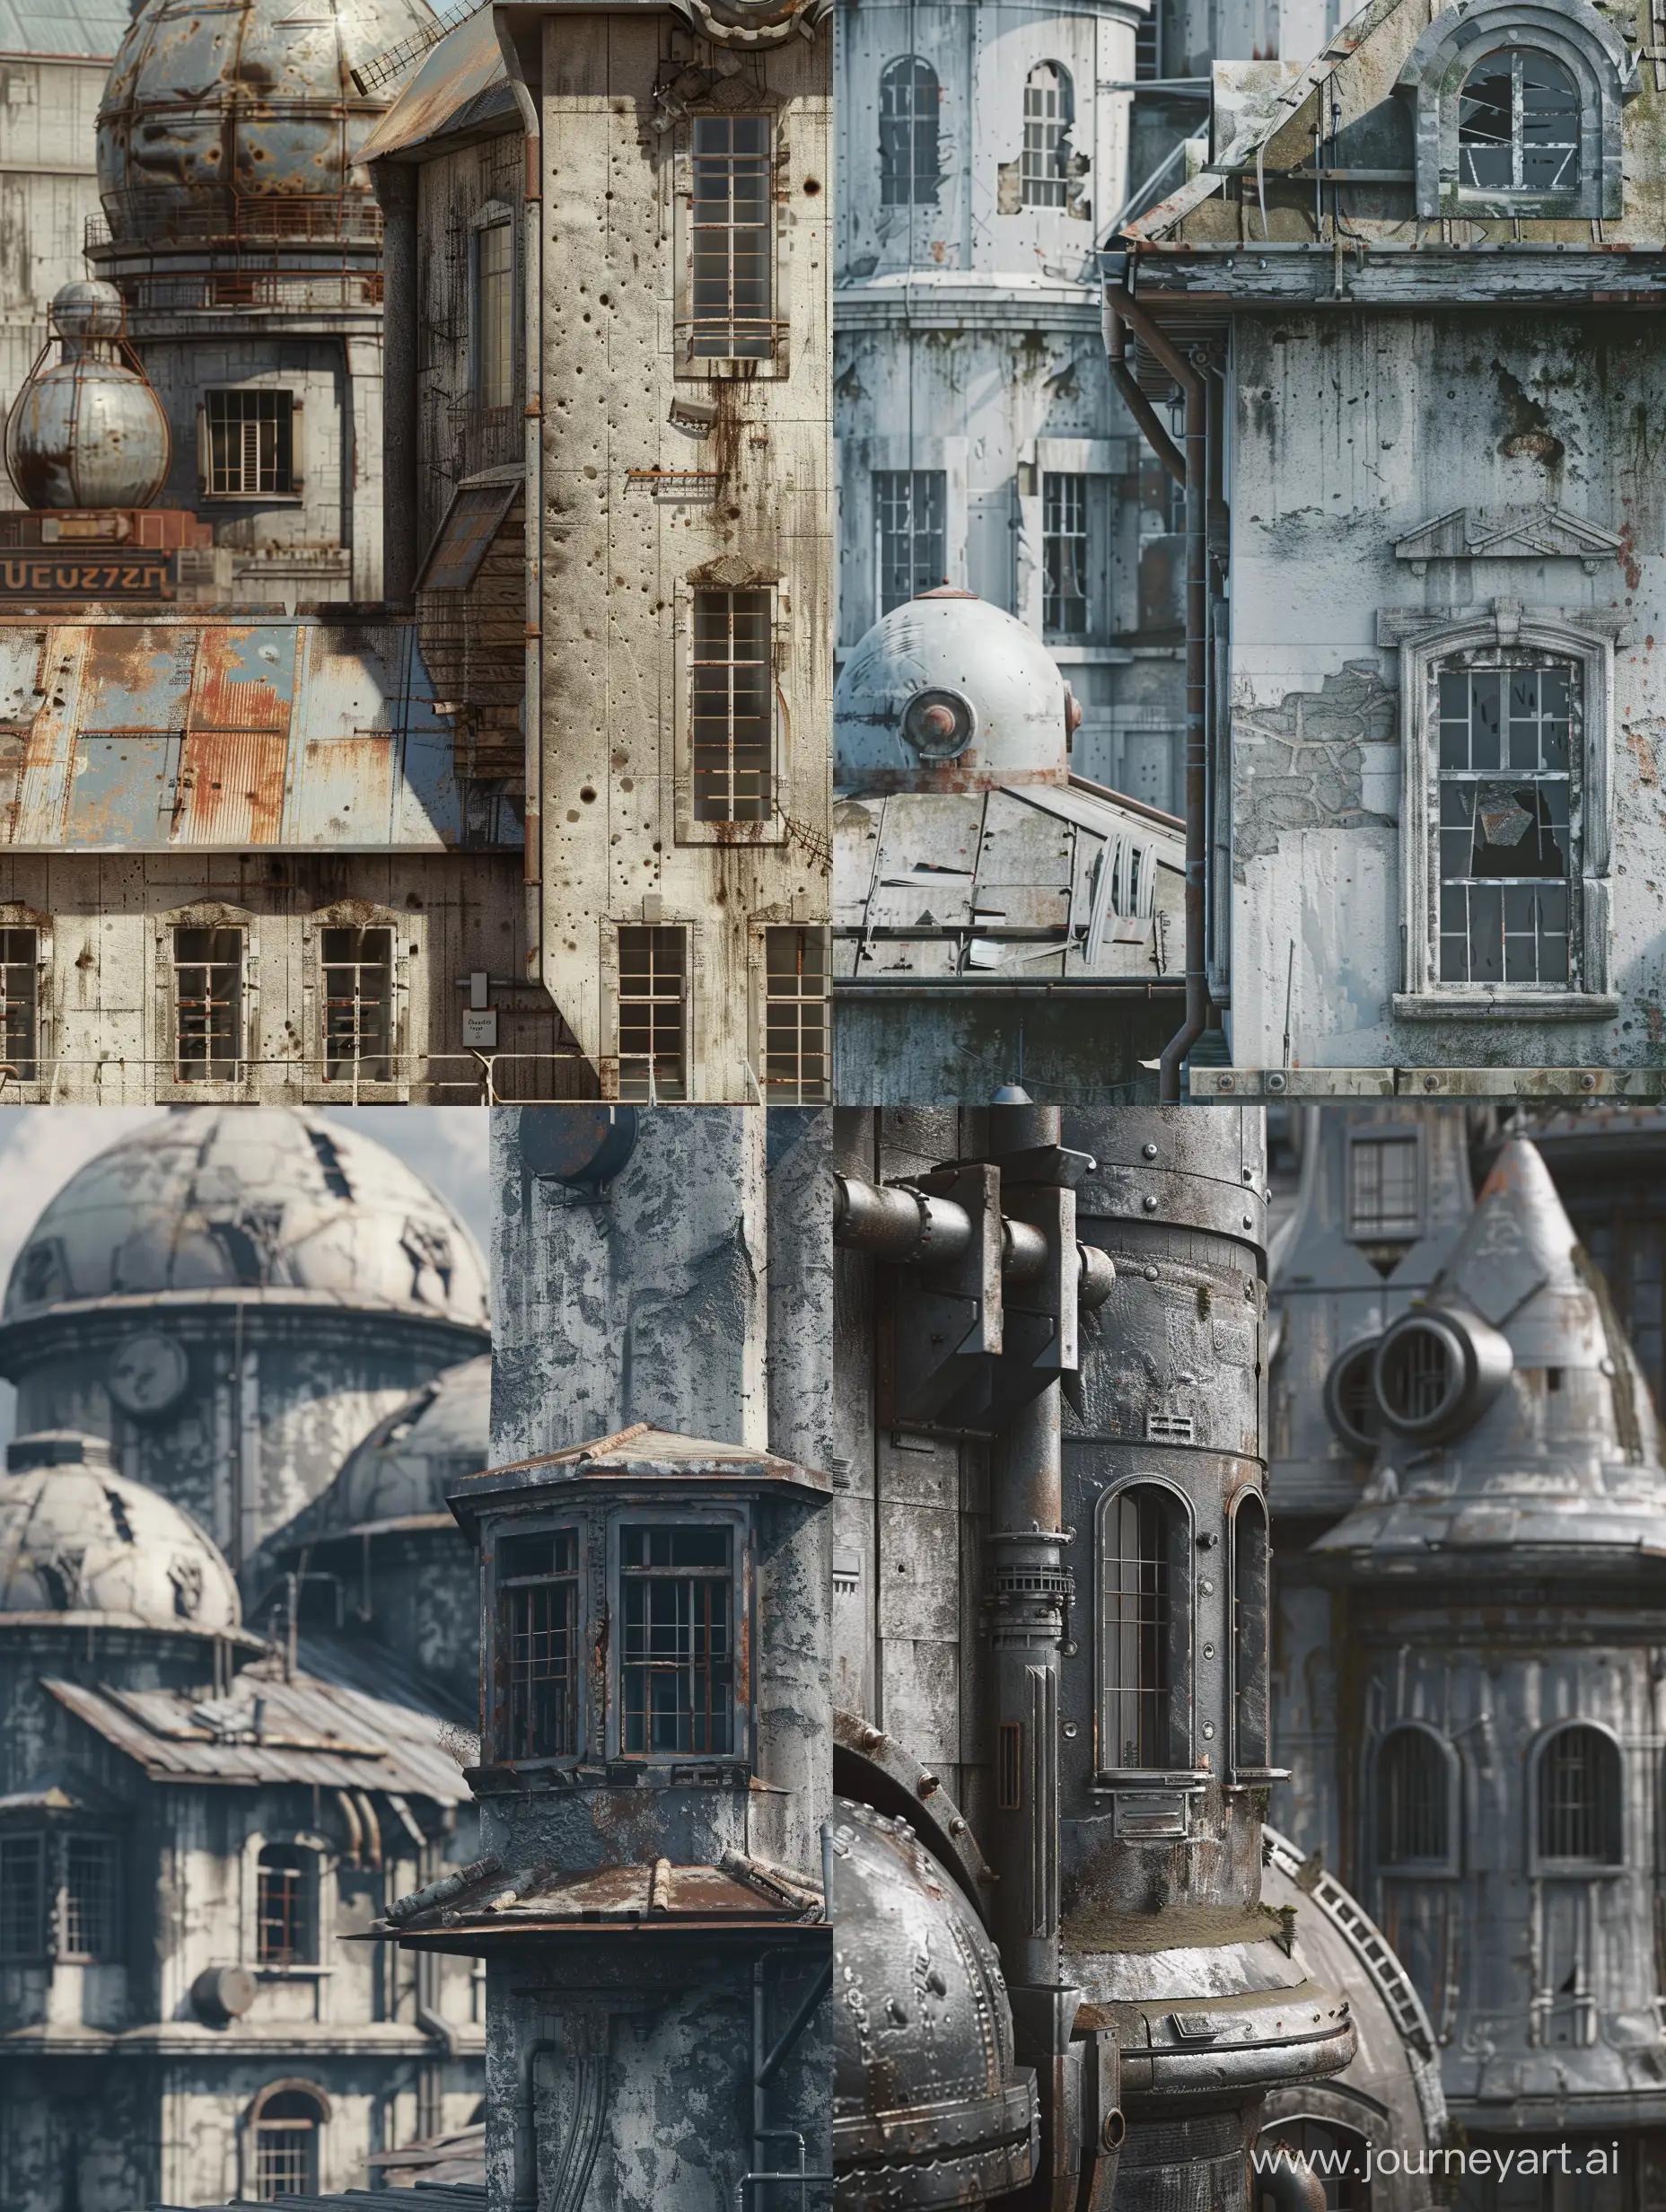 PostApocalyptic-Brutalist-Building-with-Old-Russian-Style-House-and-Cyberpunk-Elements